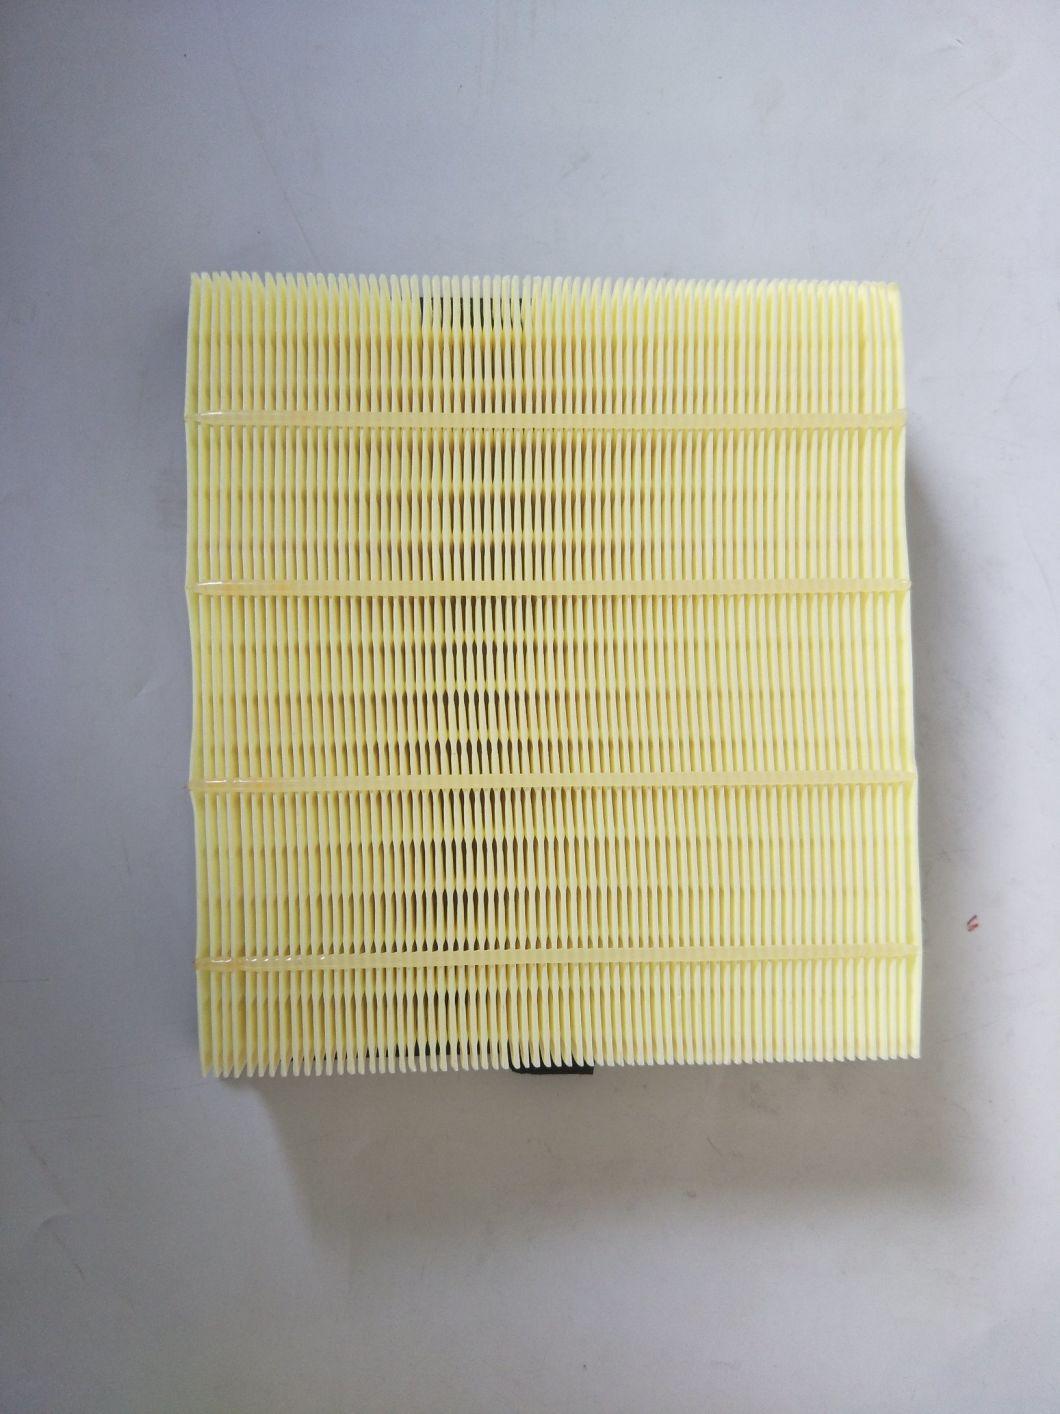 Auto Spare Parts Car Air Filter Auto Filter Good Quality 8-98140-266-0 OEM 60603982 / 4450733 / 4402070